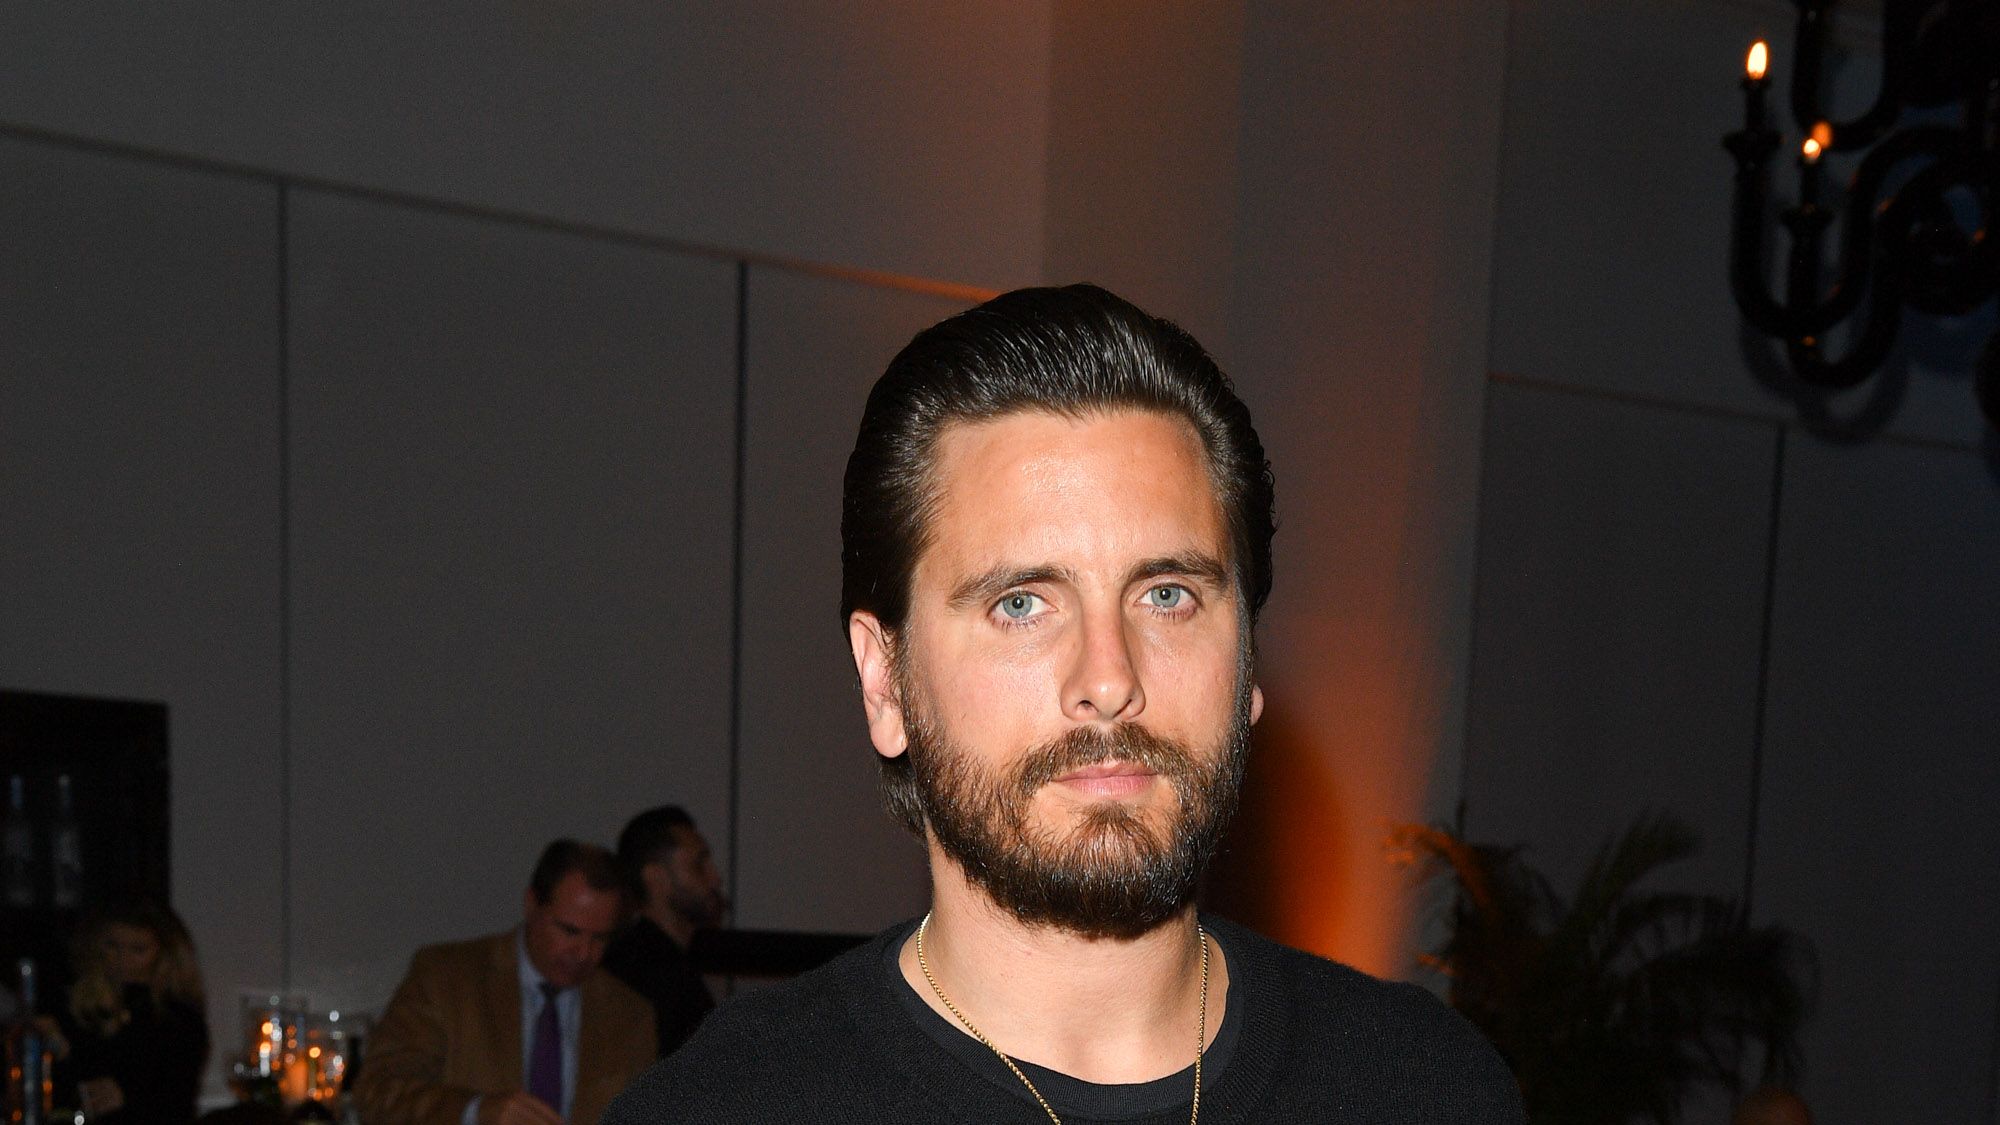 Scott Disick Is Spending Time With "People Who Can Support Him"